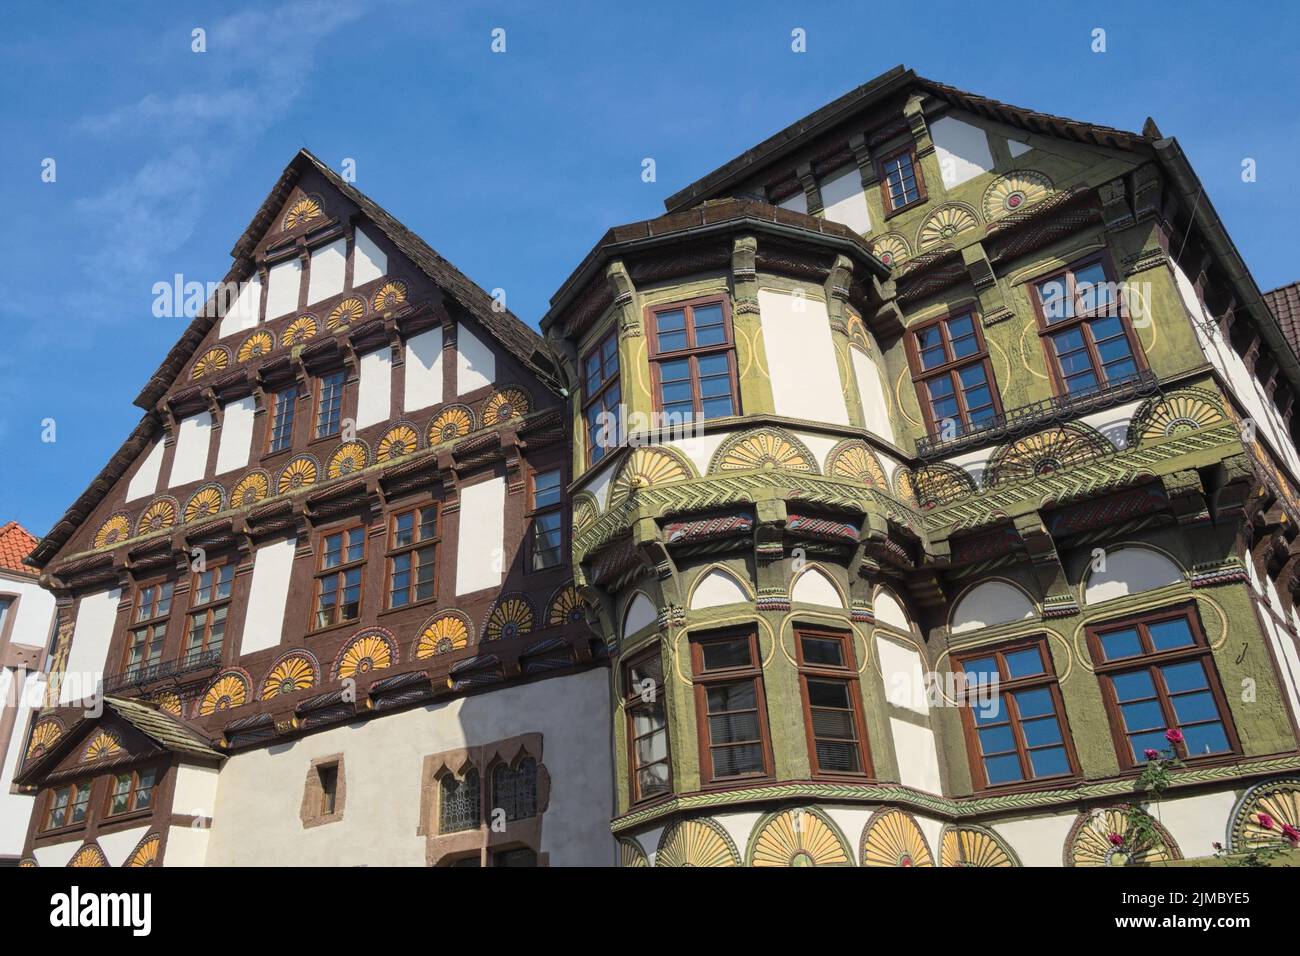 HÃ¶xter - Colourful half-timbered houses, Germany Stock Photo